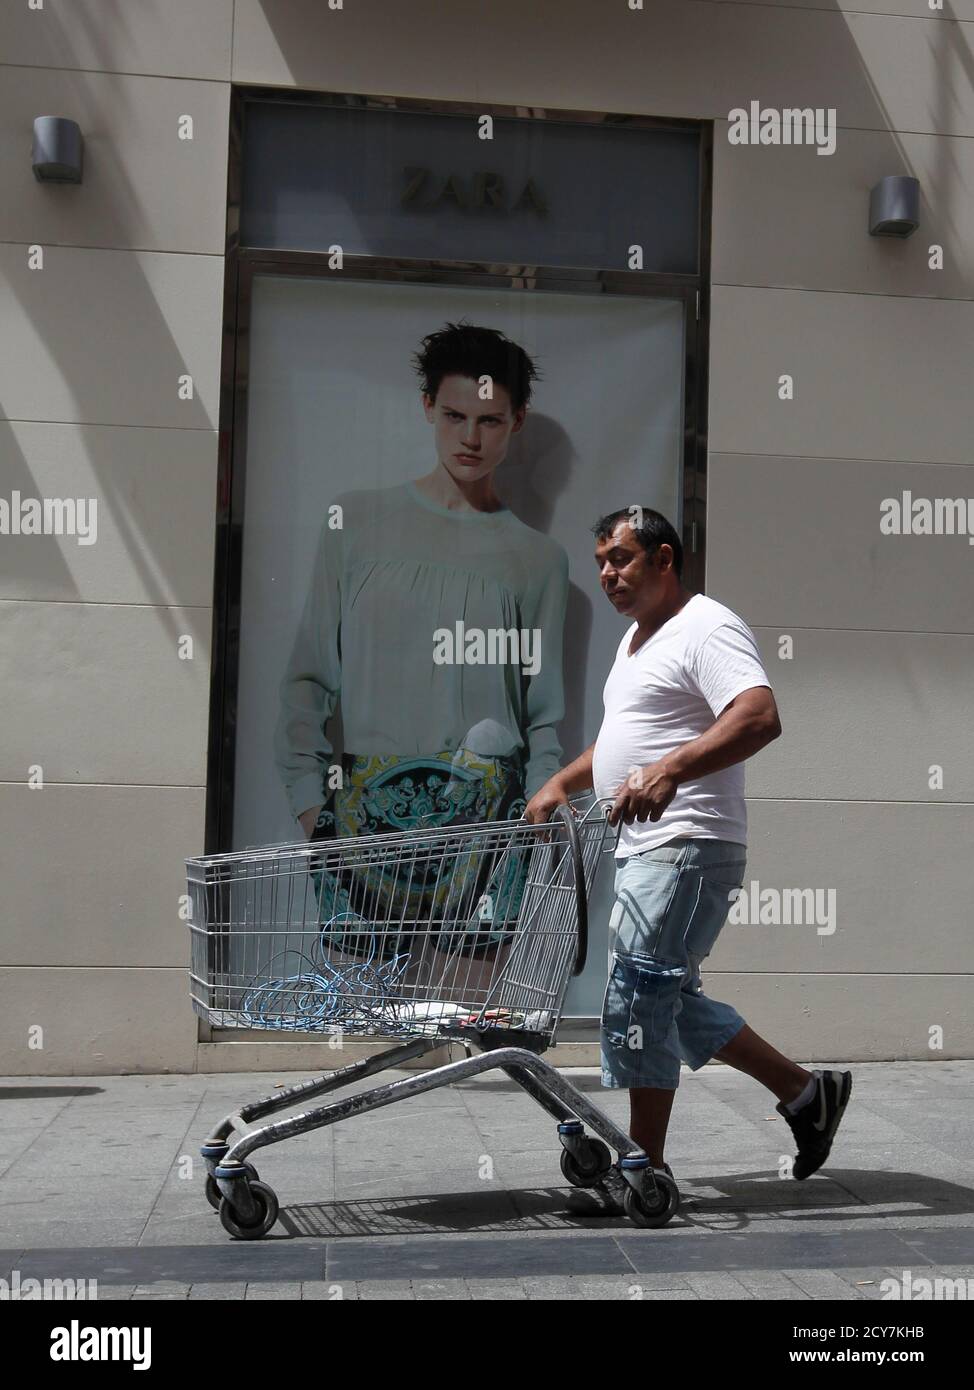 A man pushes a shopping trolley past a Zara store in Madrid June 13, 2012.  Spain's Inditex SA, the world's largest clothes retailer, bucked Europe's  financial crisis with a sharp rise in